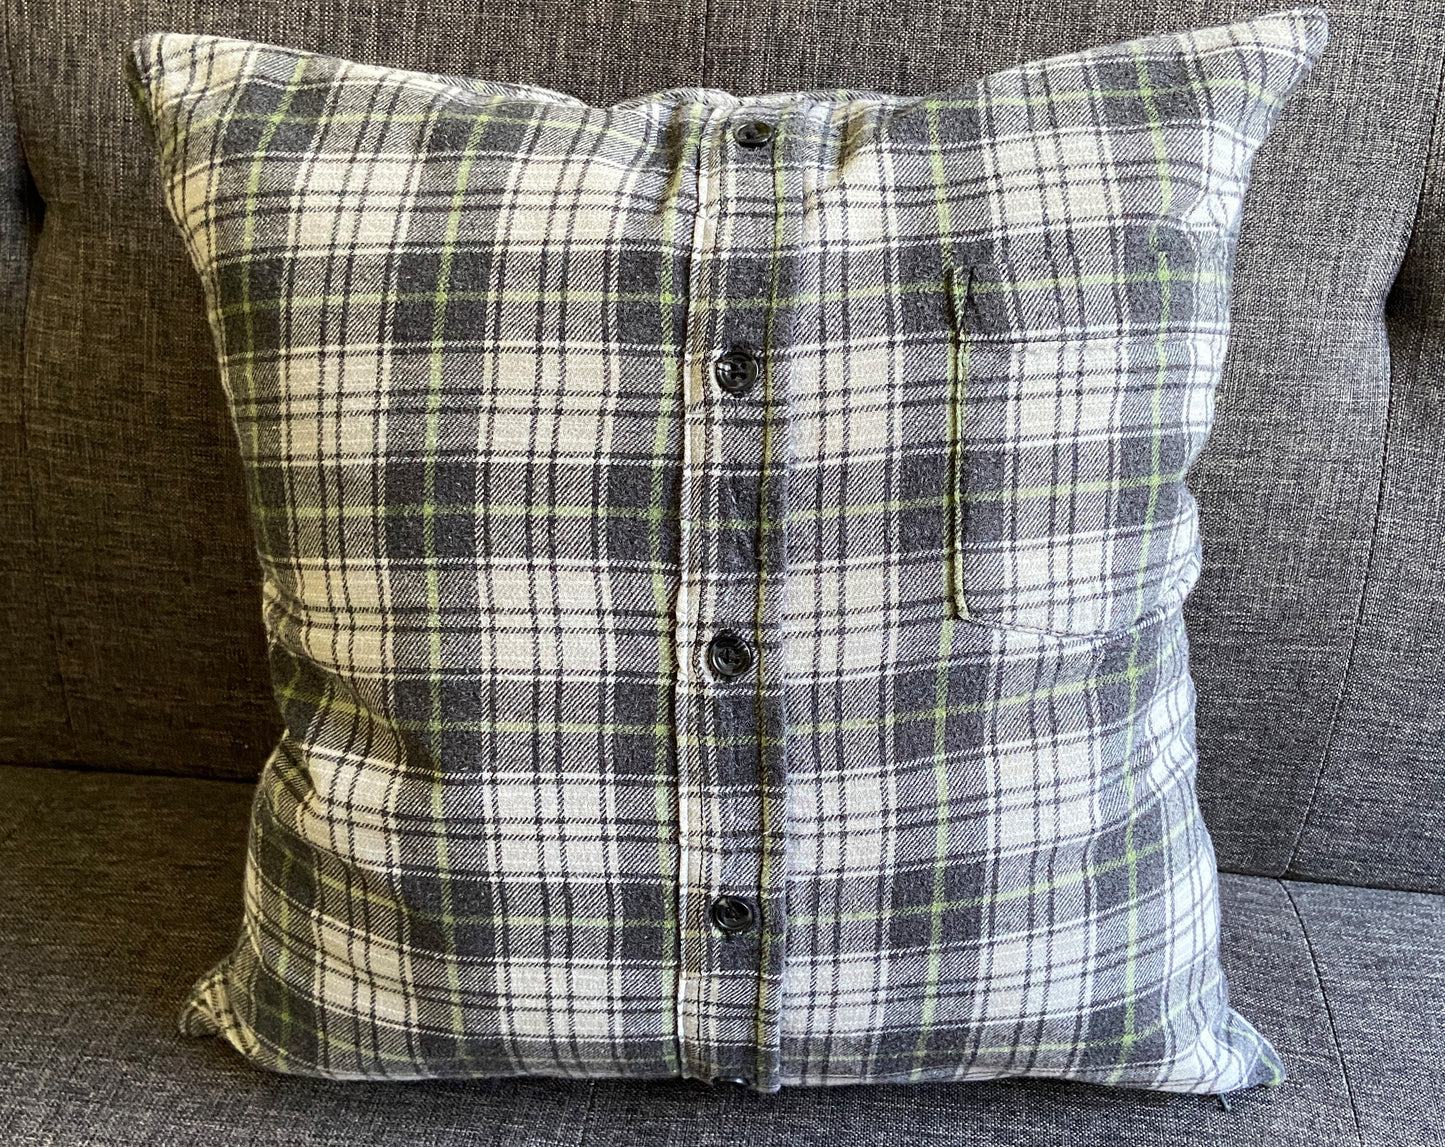 memory pillow made from a shirt